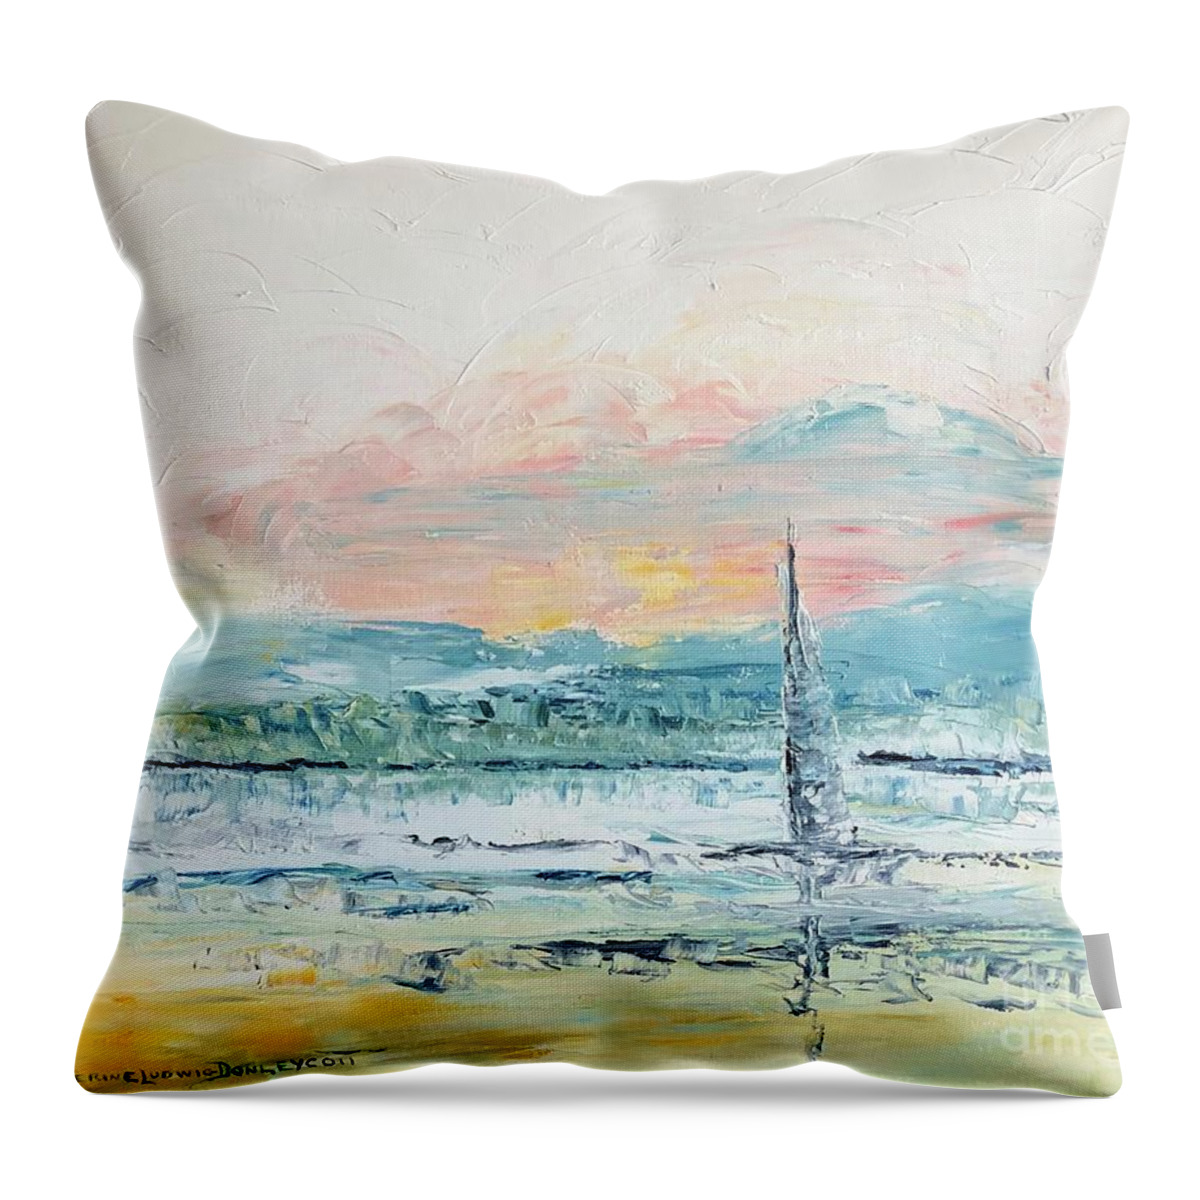 Seascape Throw Pillow featuring the painting Sail Away Home by Catherine Ludwig Donleycott